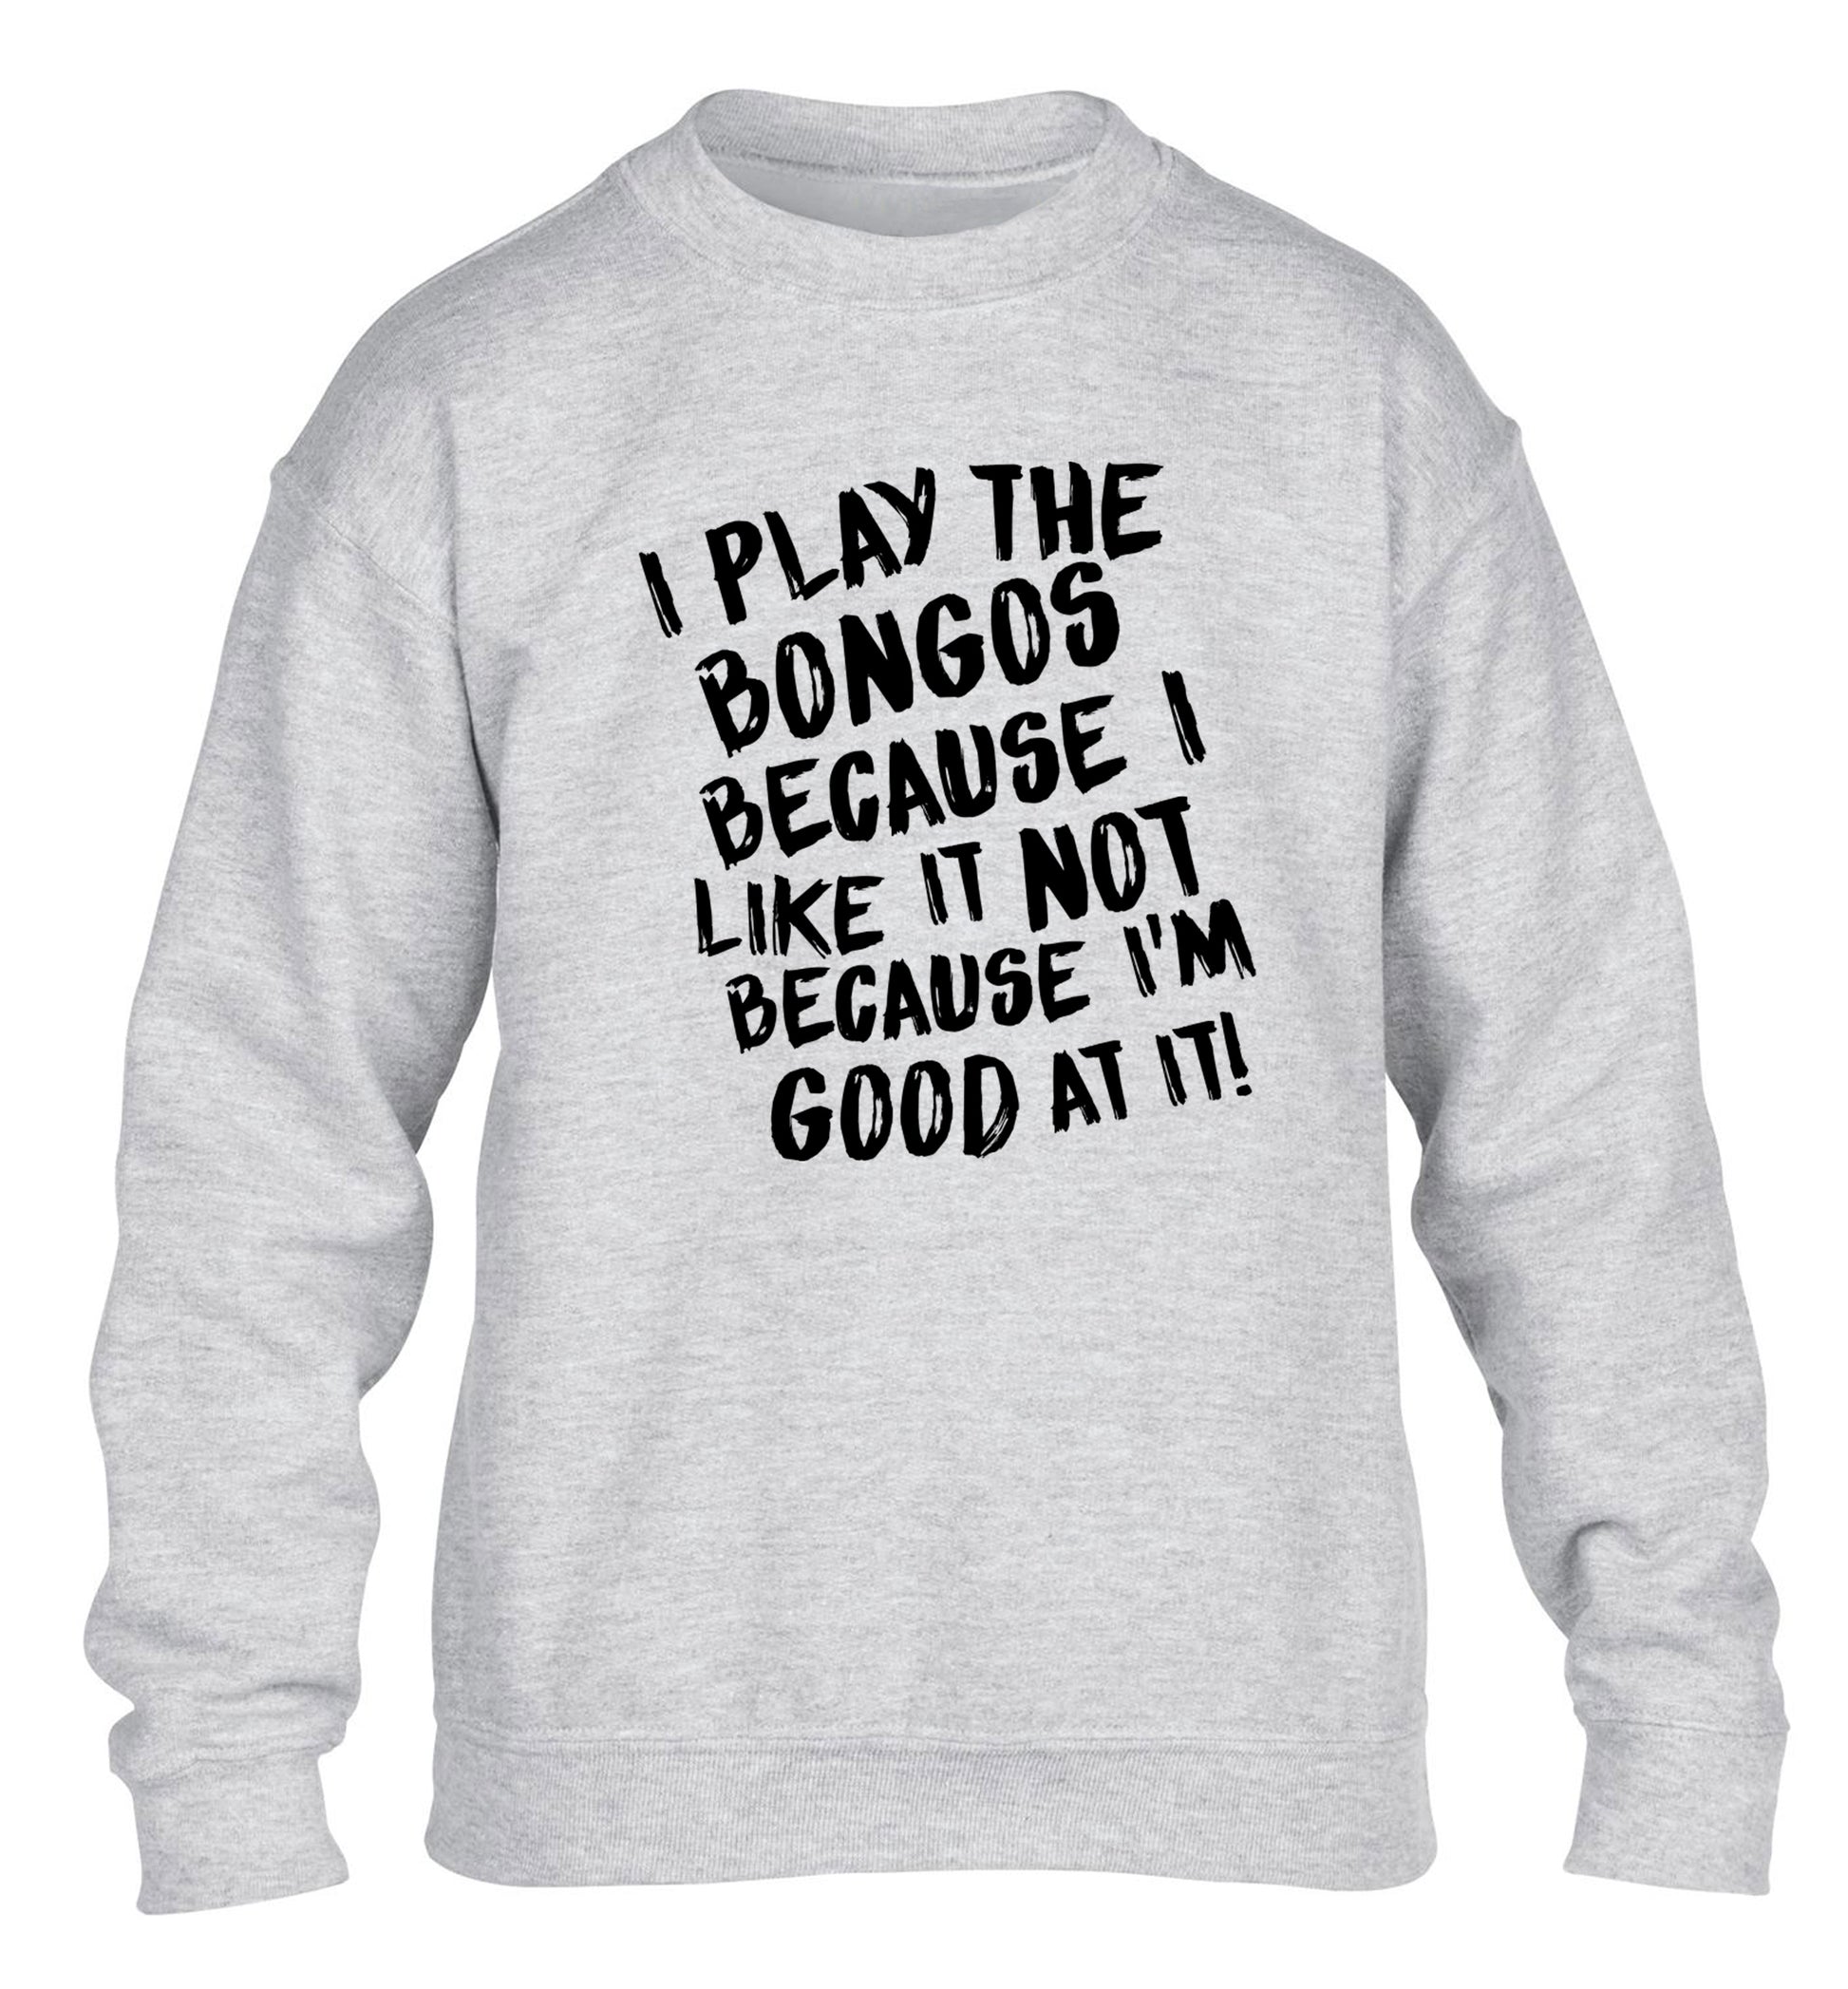 I play the bongos because I like it not because I'm good at it children's grey sweater 12-14 Years